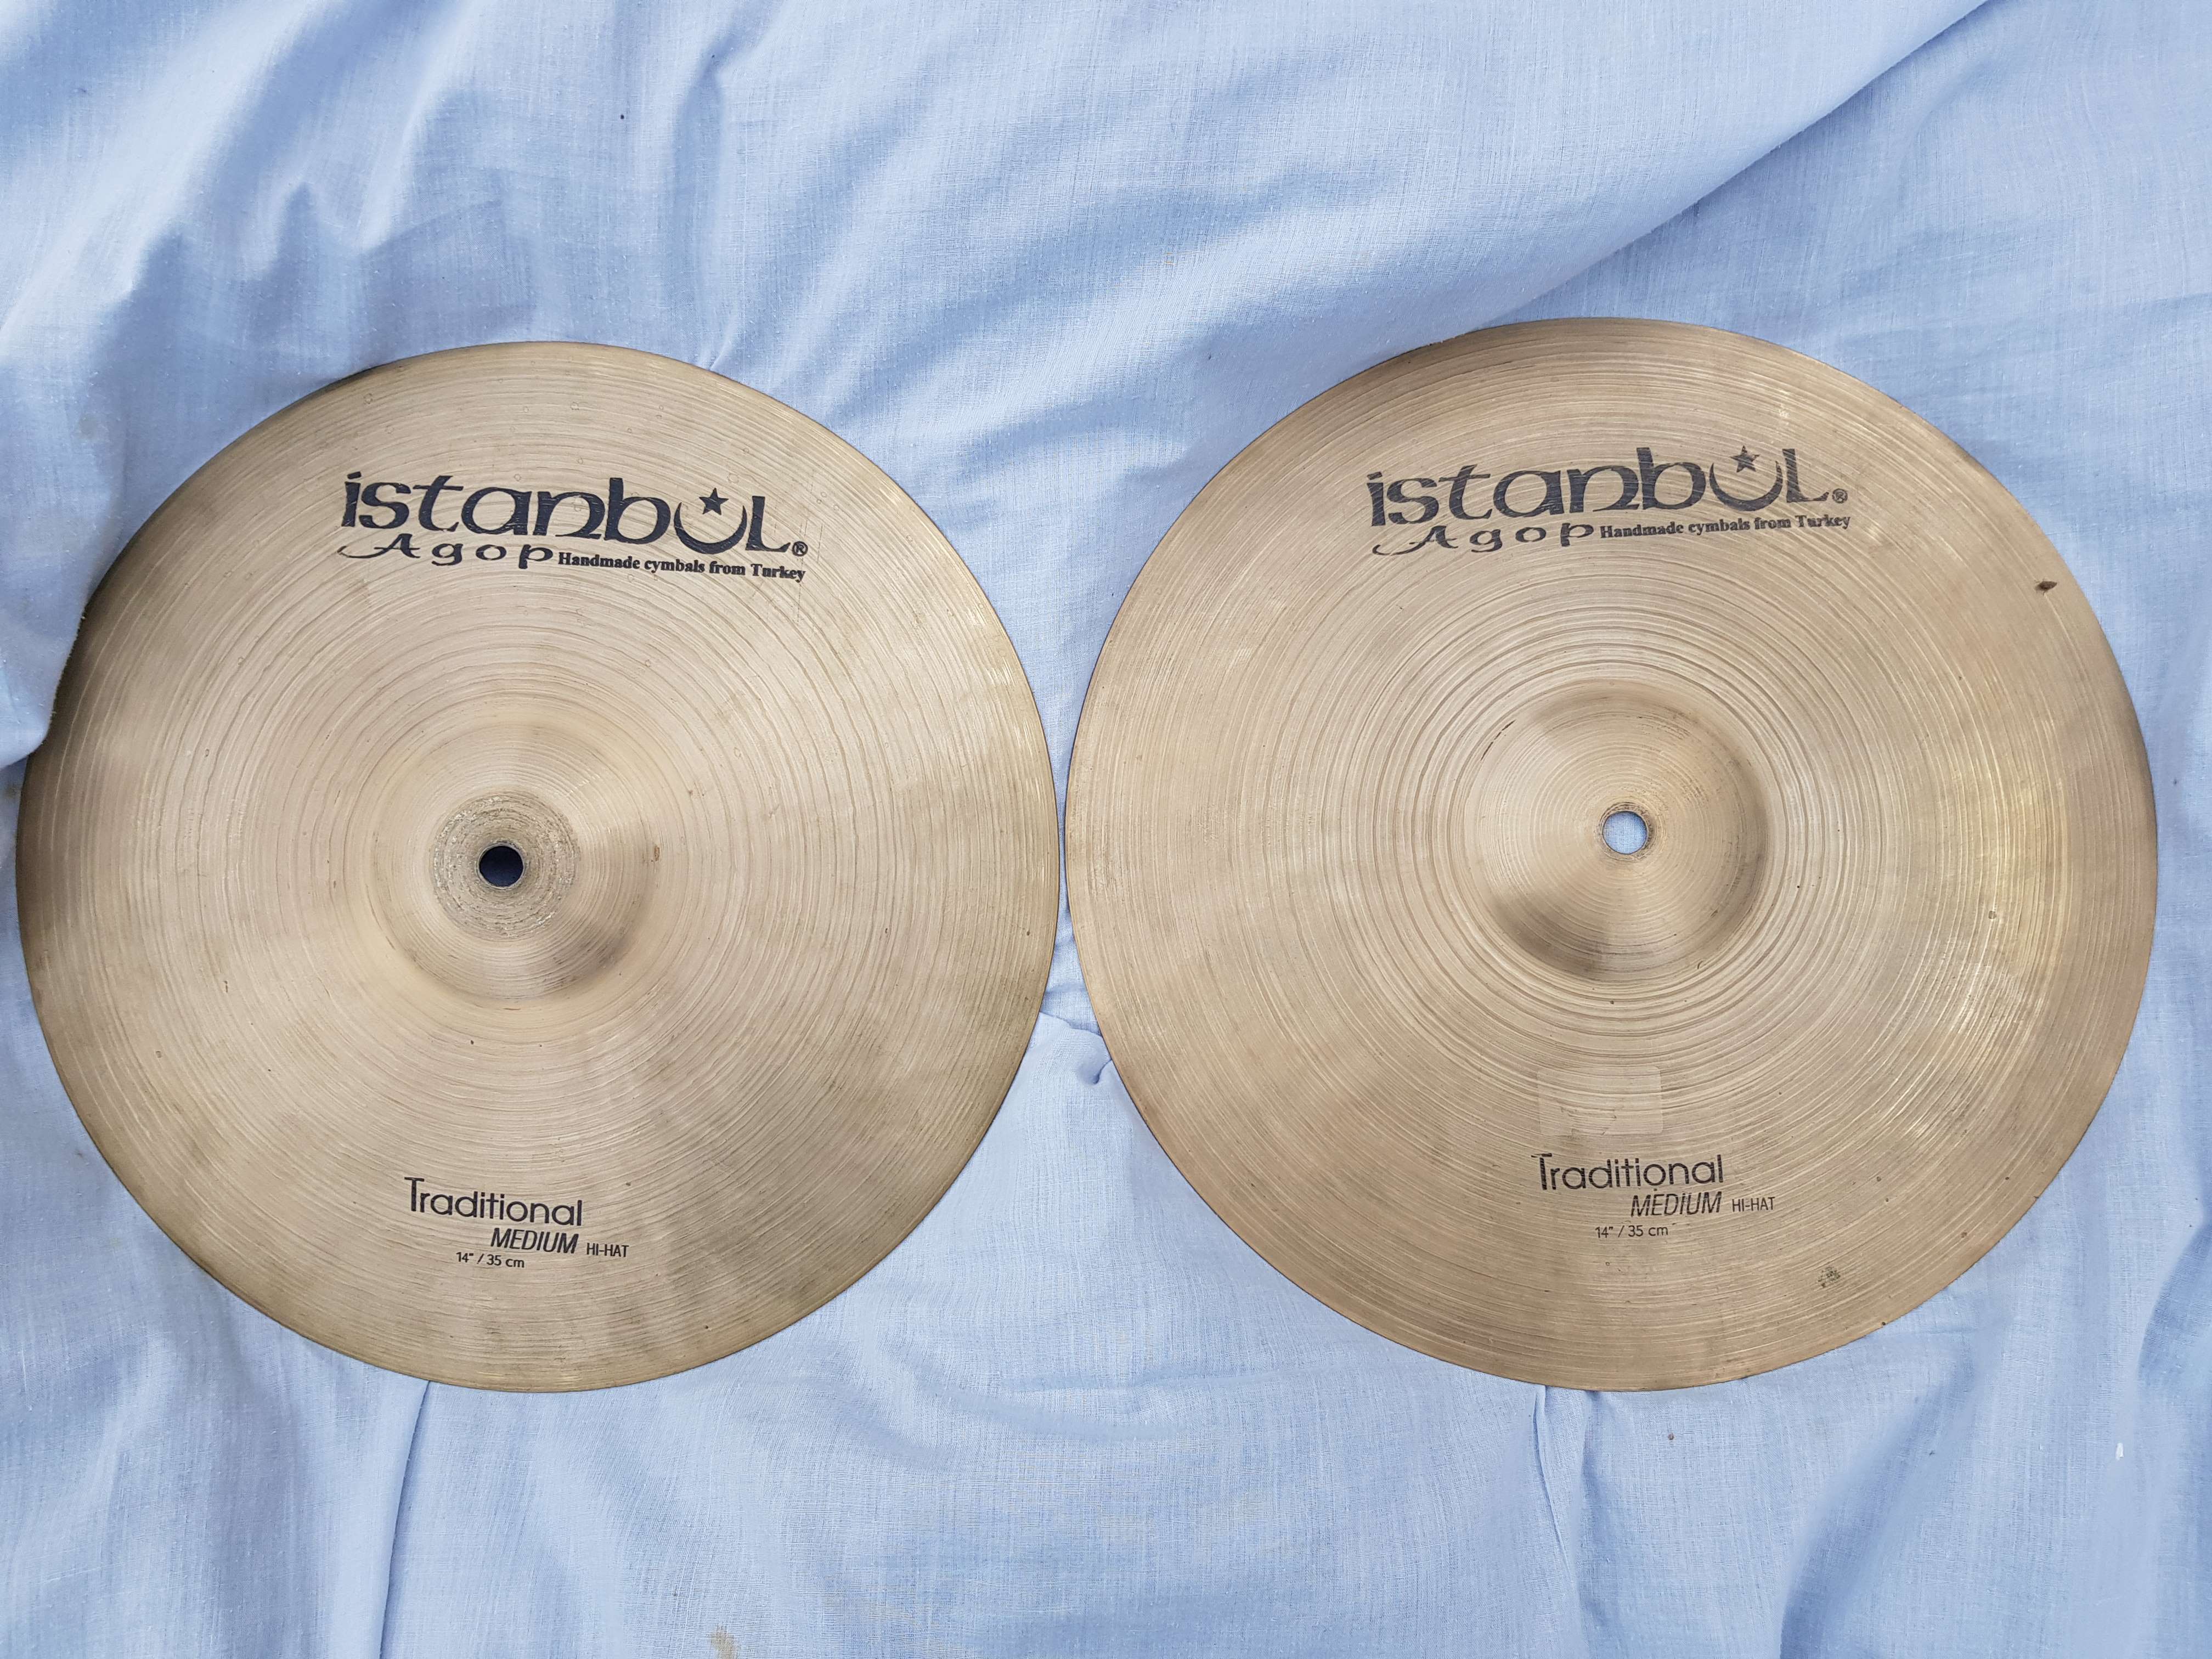 Hit Hat Istanbul Agop Traditional.jpg